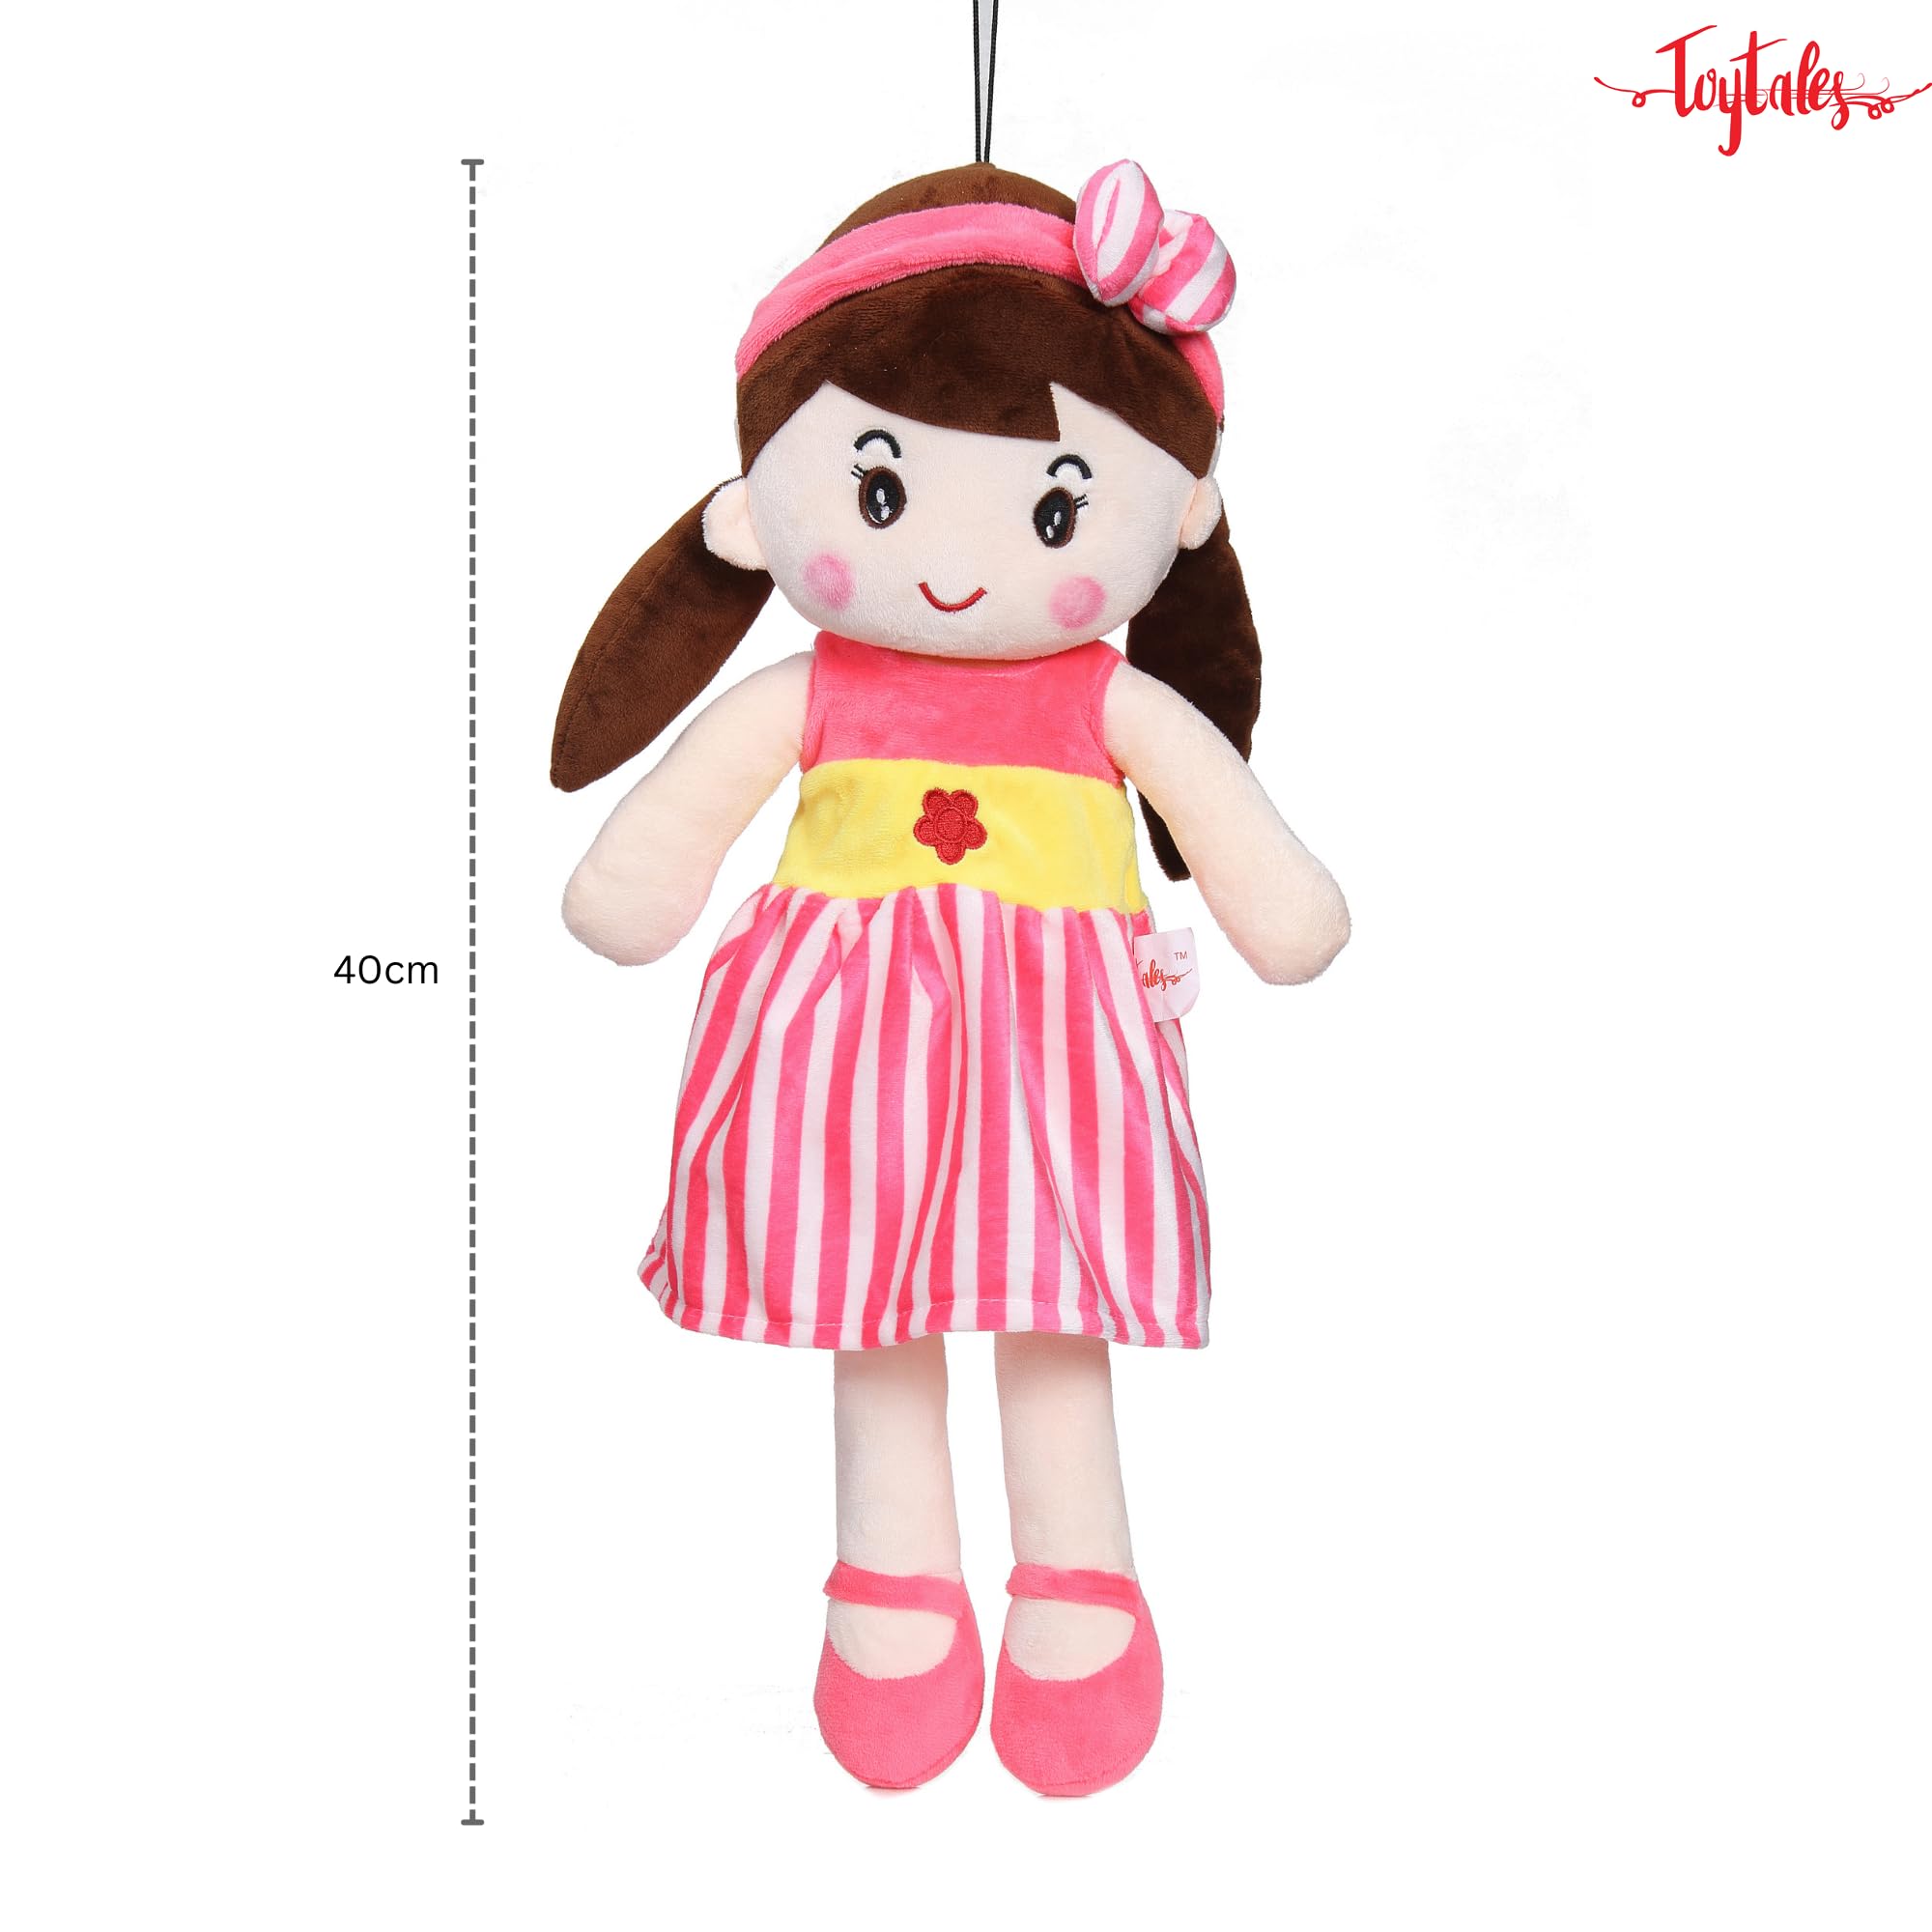 Cute Super Soft Stuffed Doll Small 40cm, Cuddly Squishy Dolls, Plush Toy for Baby Girls, Spark Imaginative Play, Safe & Fun Gift for Kids, Perfect for Playtime & Cuddling